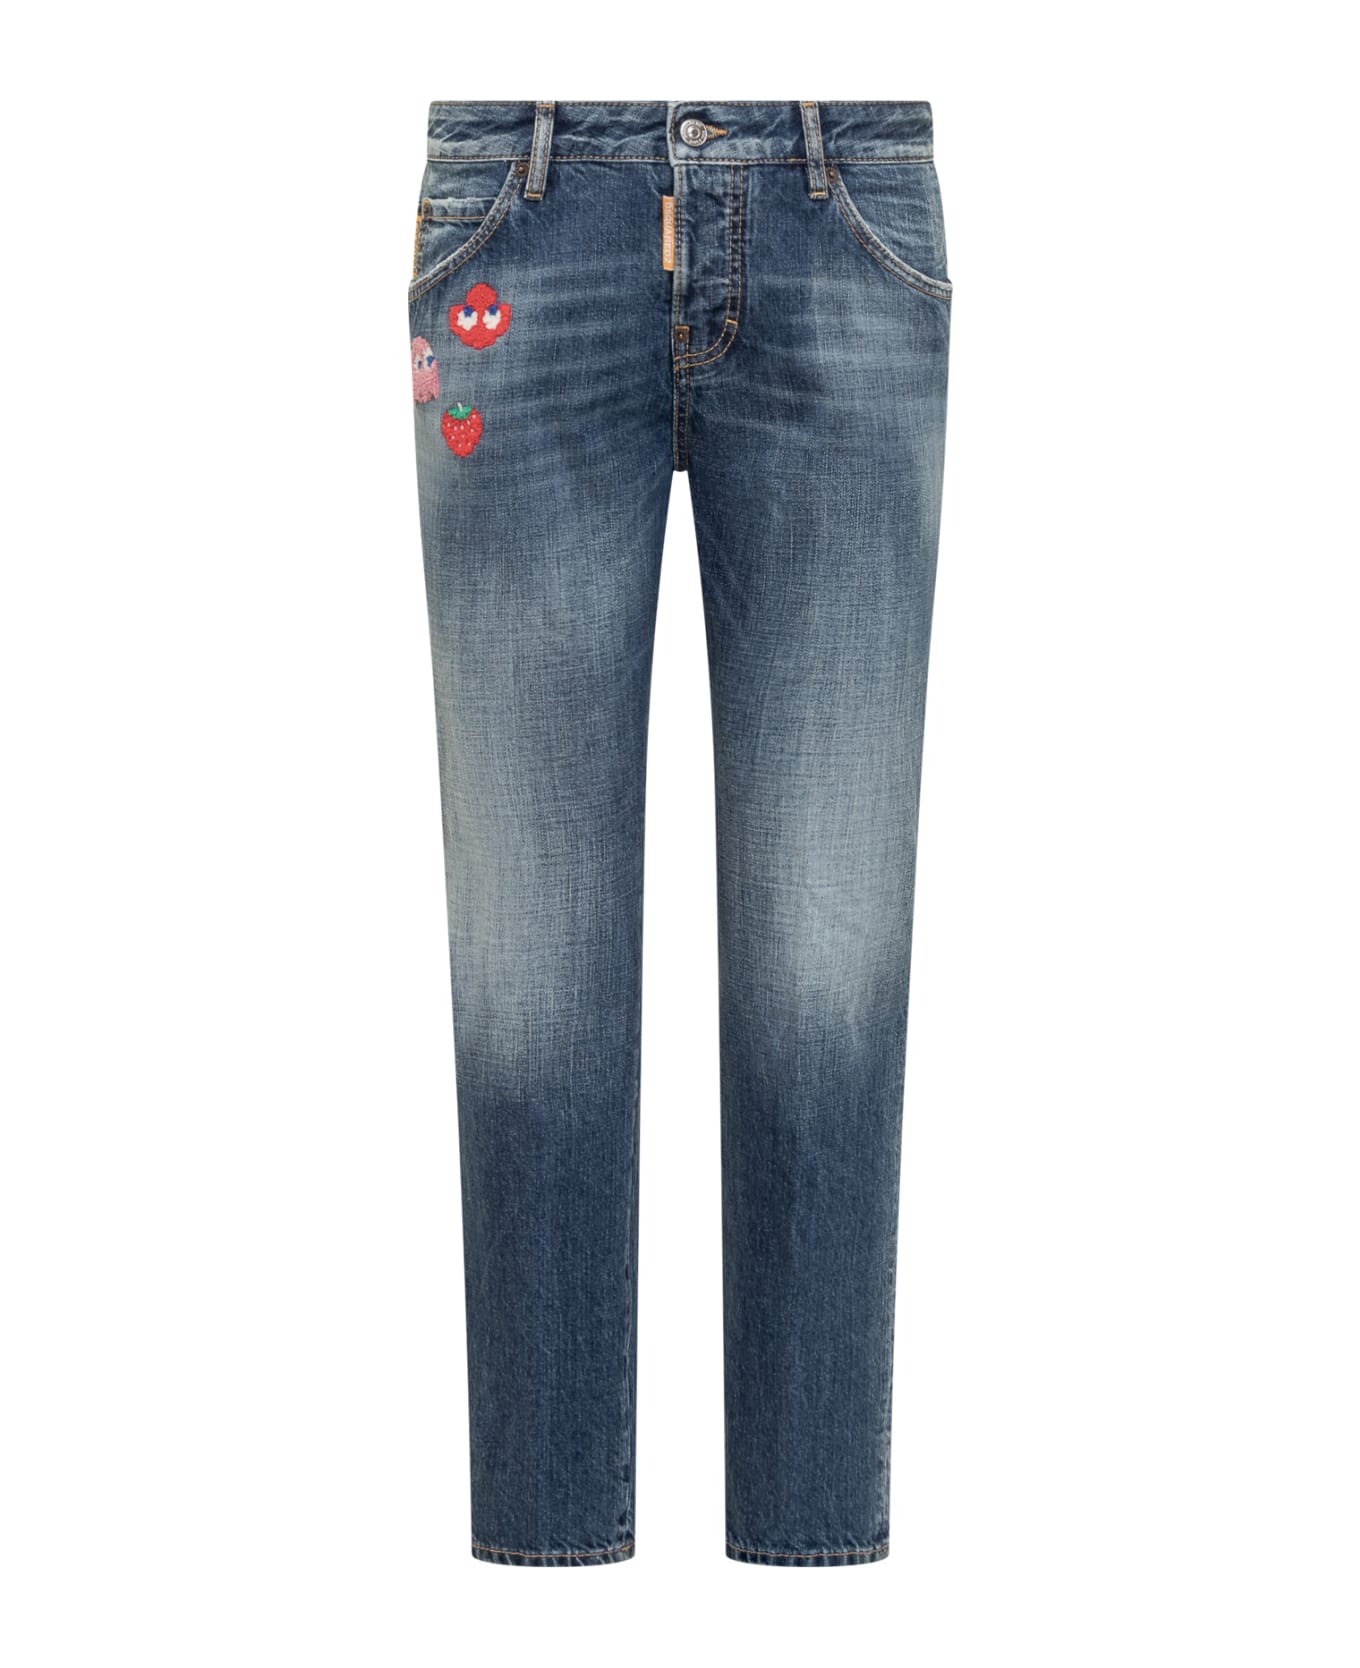 Dsquared2 Pac-man X Dsquared2 Jeans - NAVY BLUE デニム